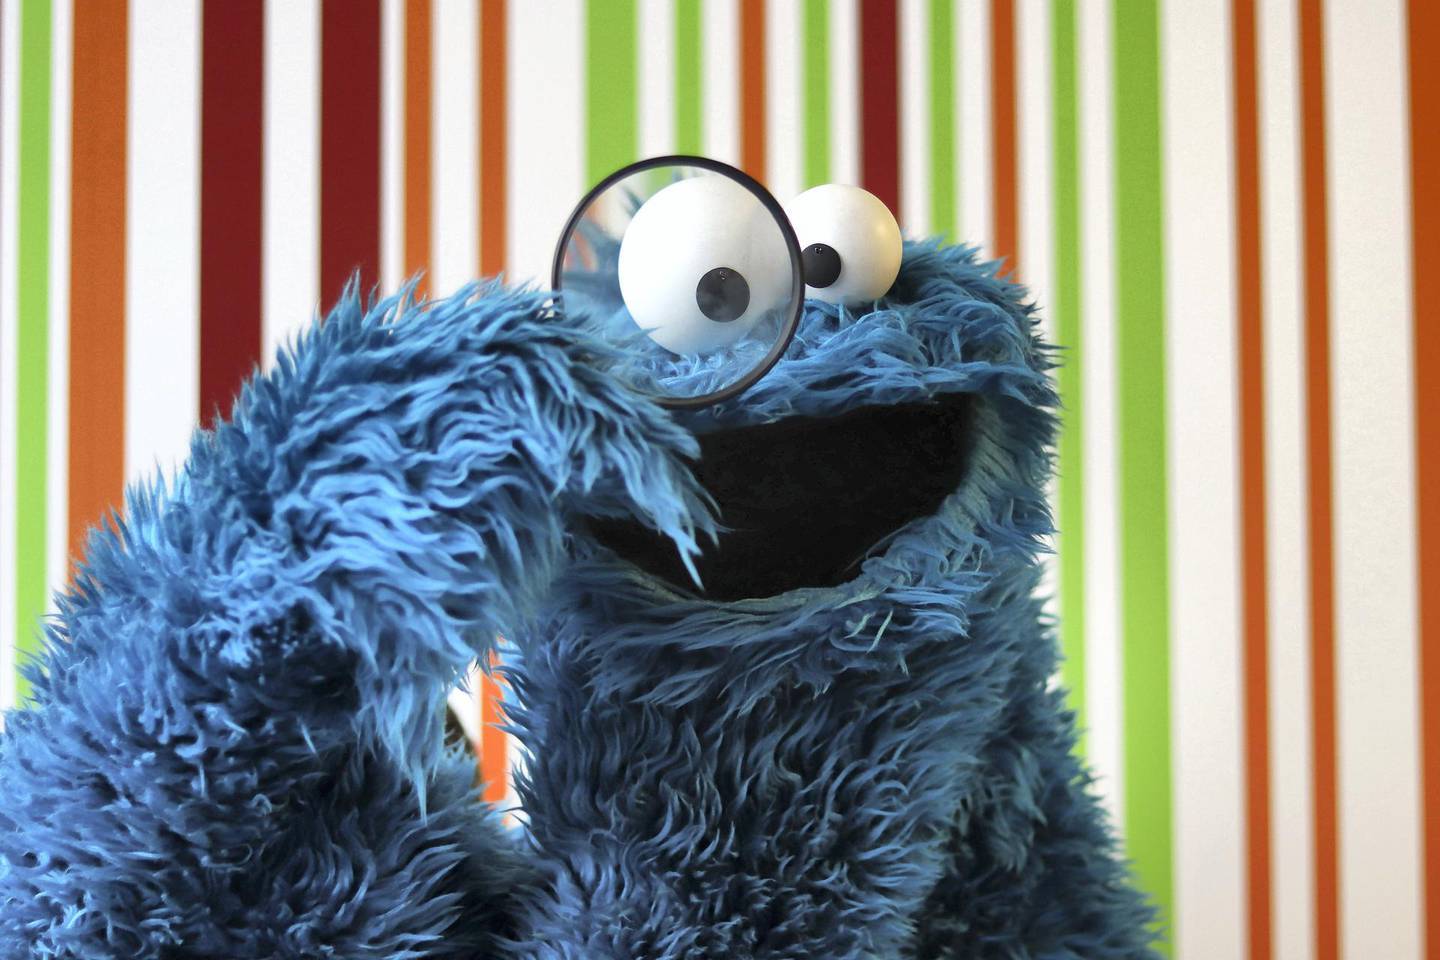 The adapted show, which features characters such as Cookie Monster, first appeared in 1979. Bidaya Media